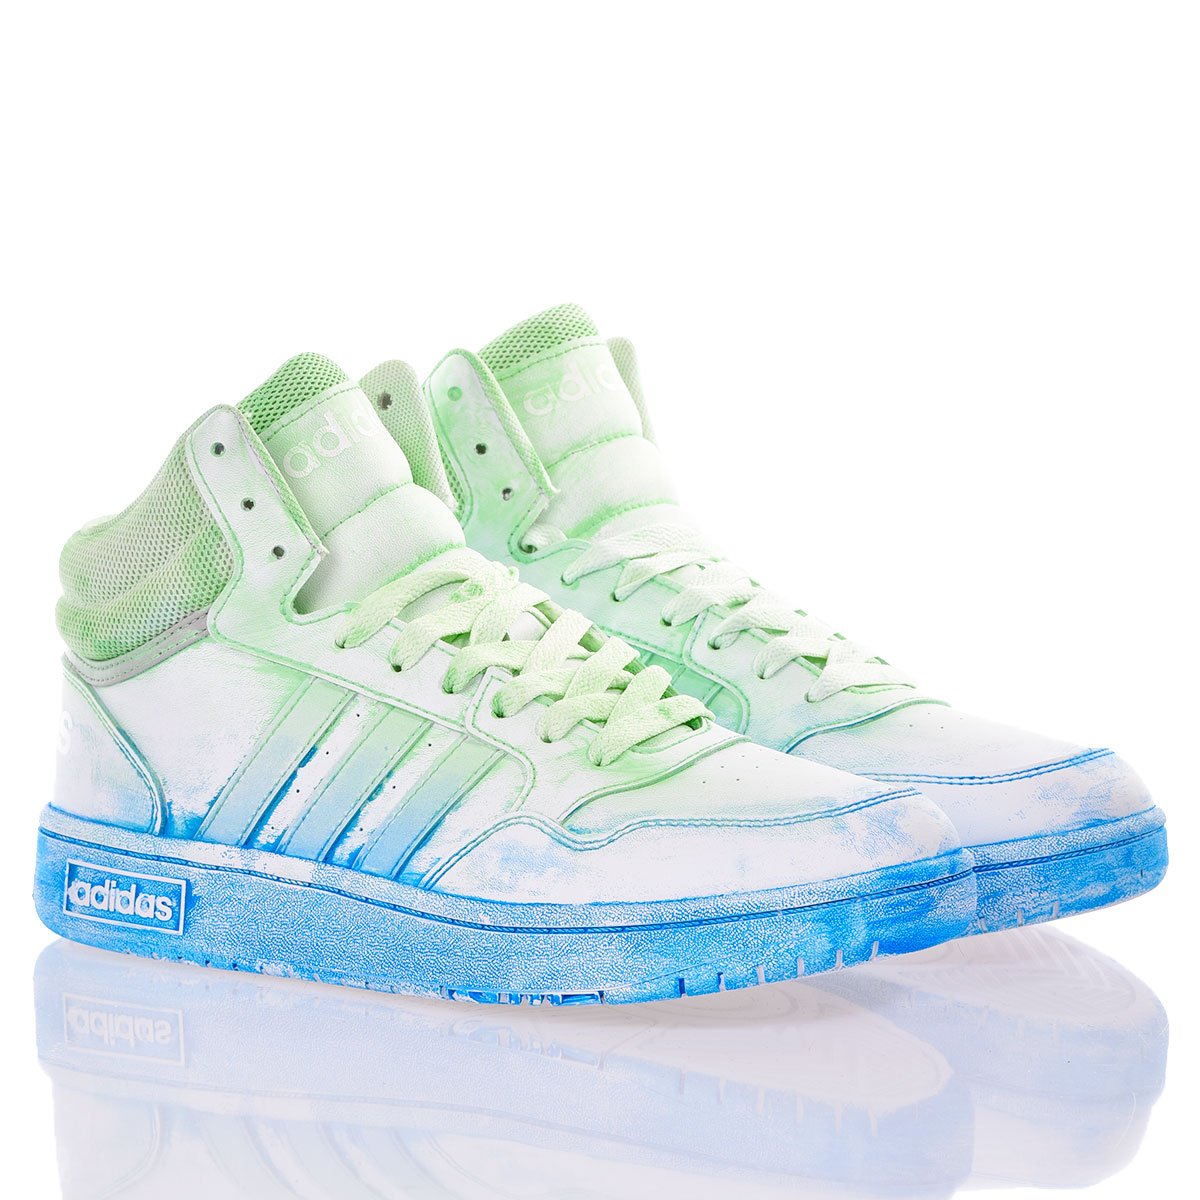 Adidas Tropical Top Ten Washed-out